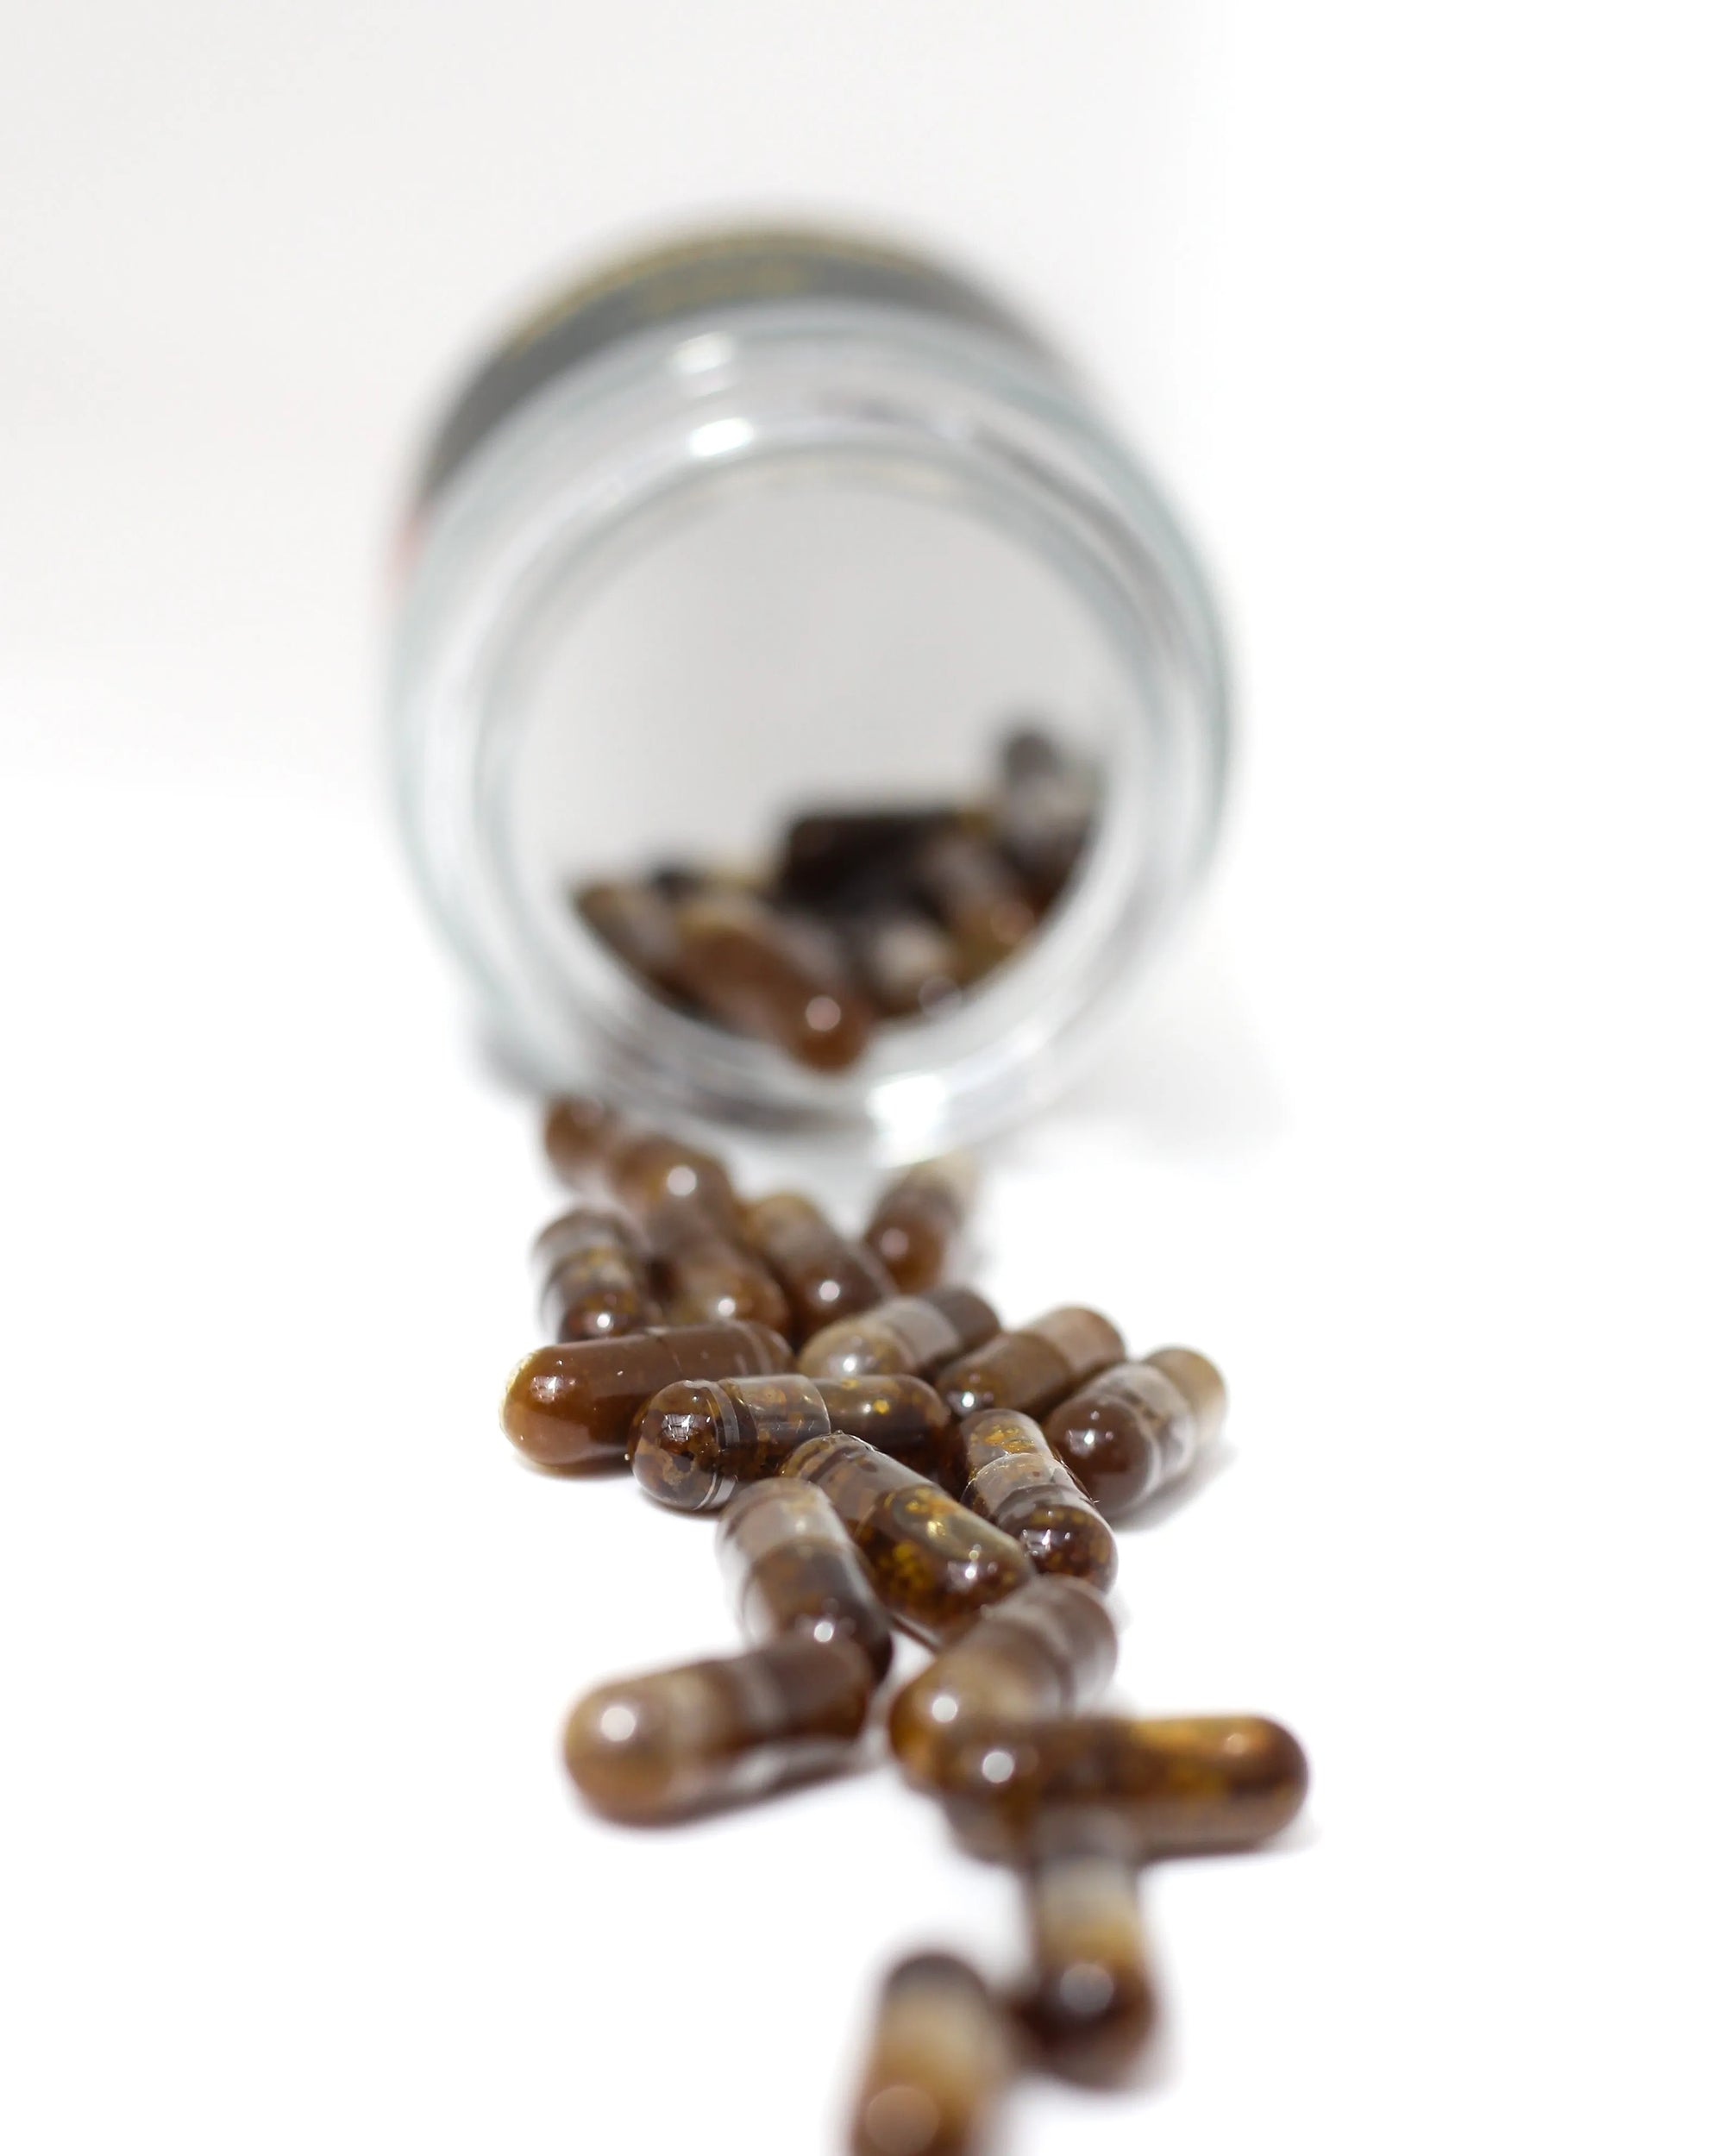 All About CBD Capsules